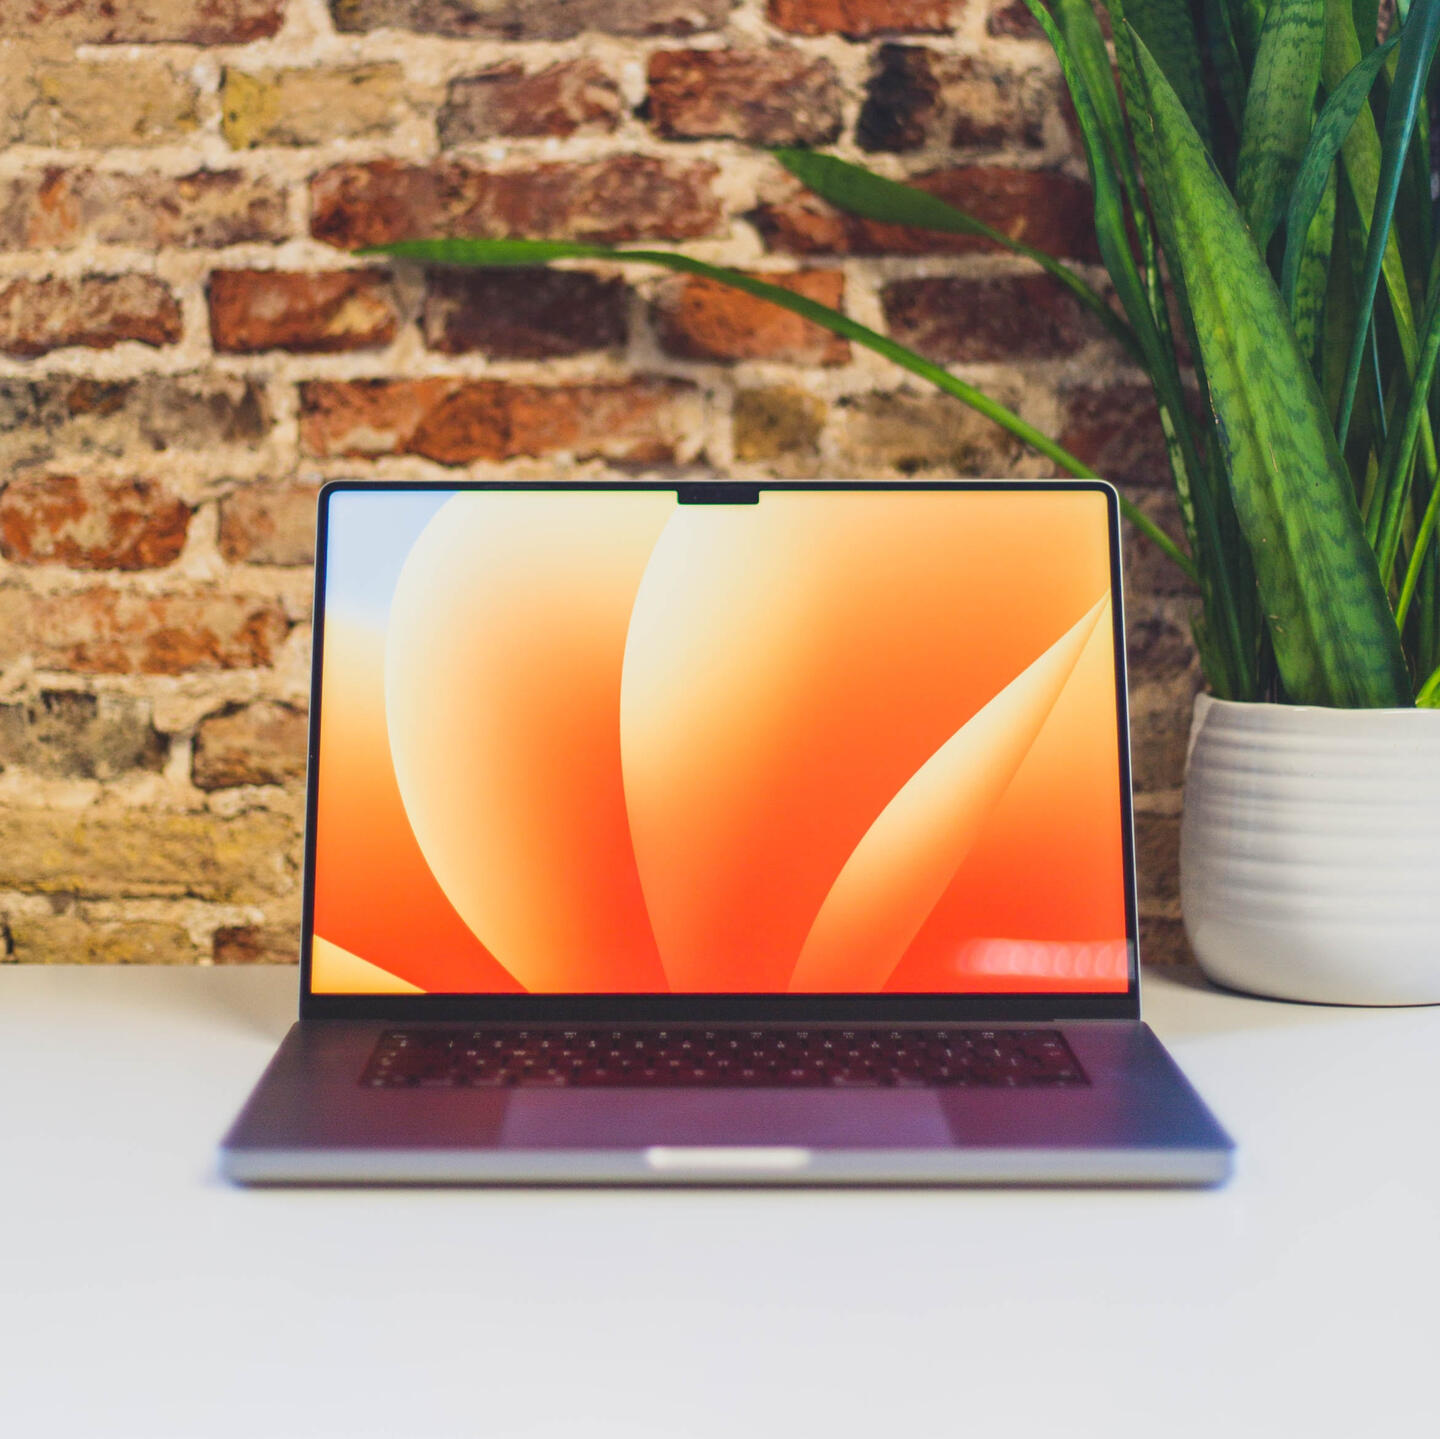 A photo of a MacBook Pro on a desk. In the background you can see a brick wall and a house plant.